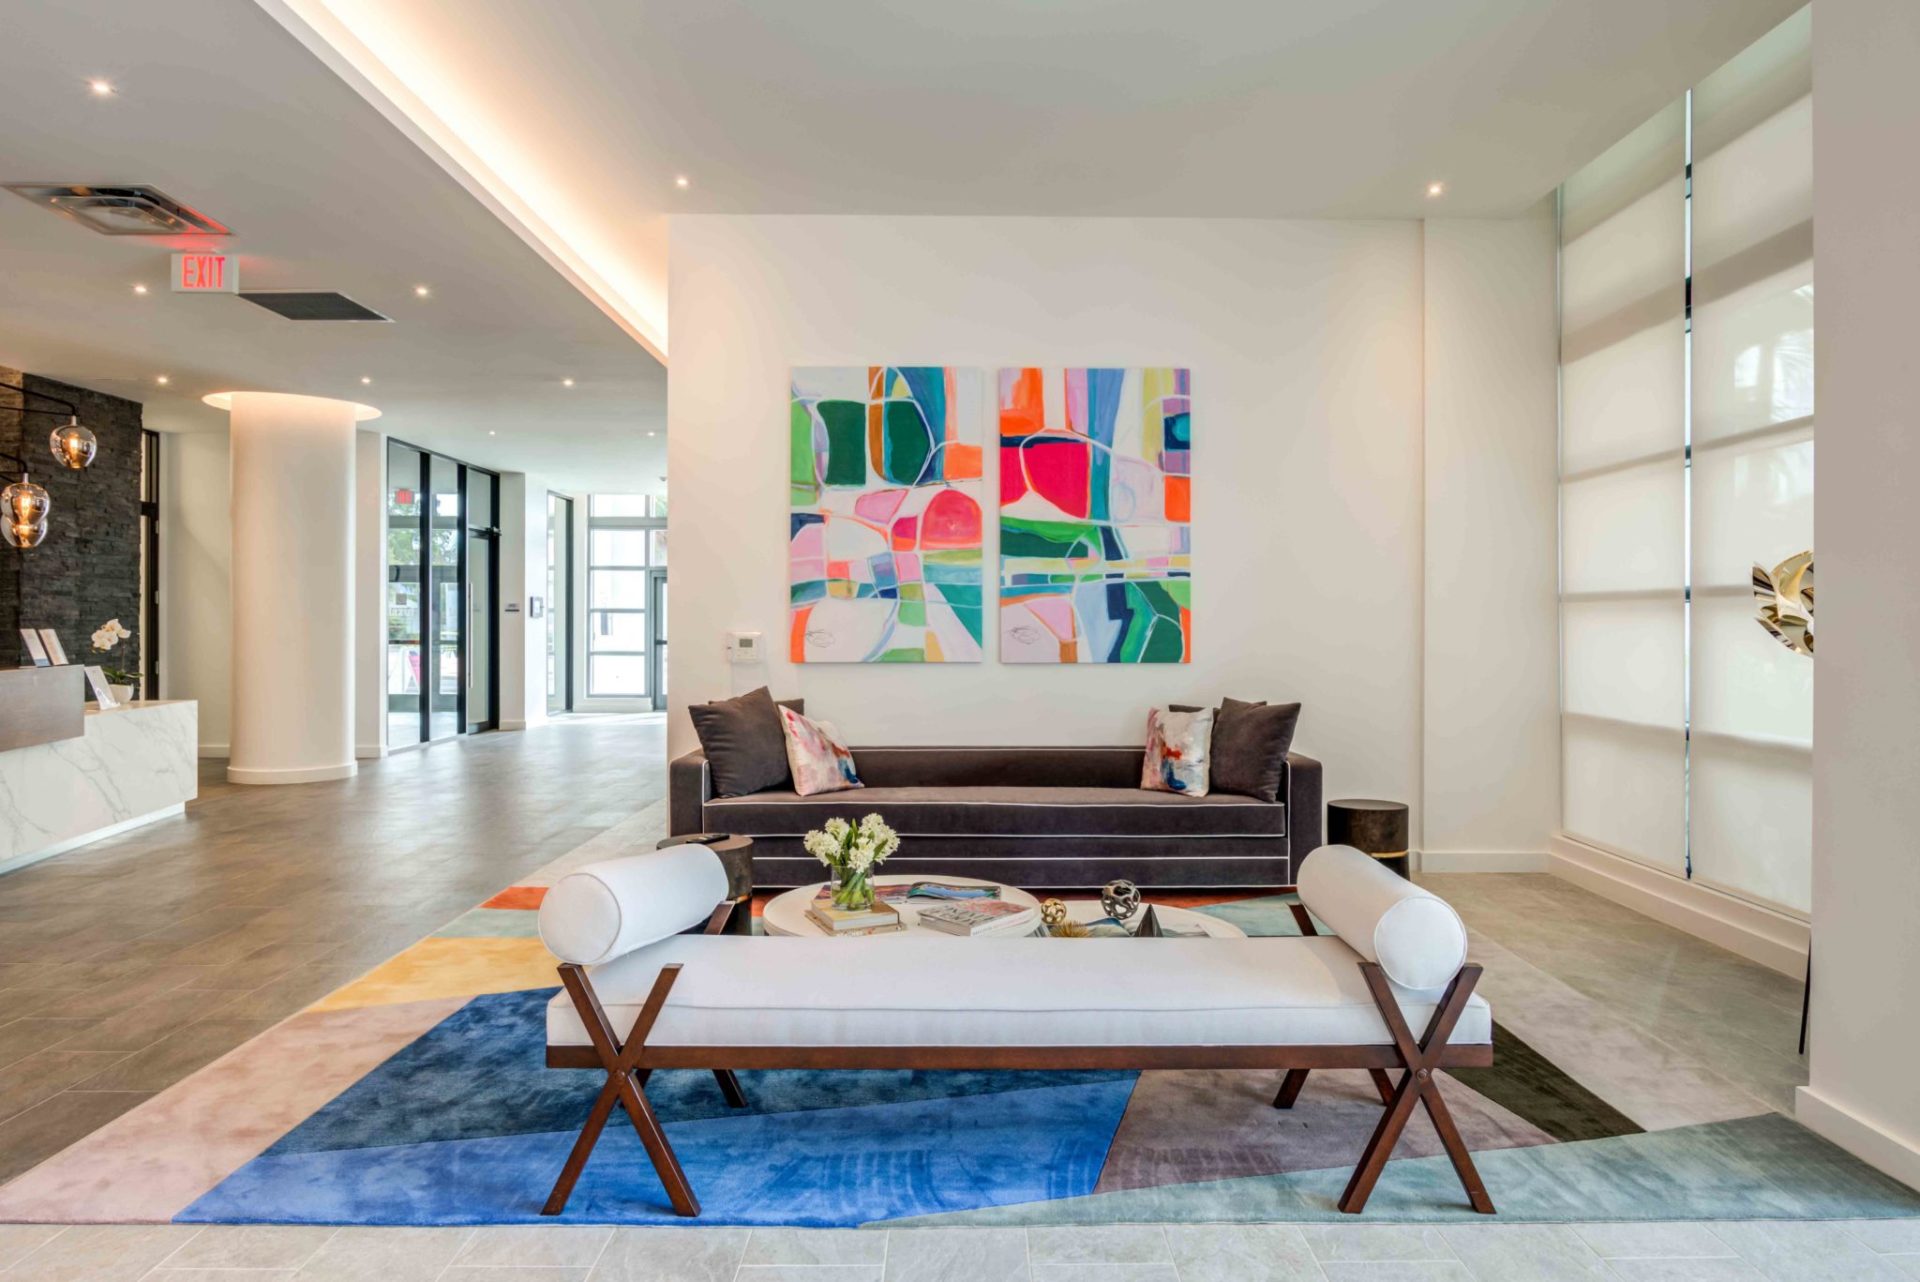 Lazul Apartments | Apartments in North Miami Beach For Rent